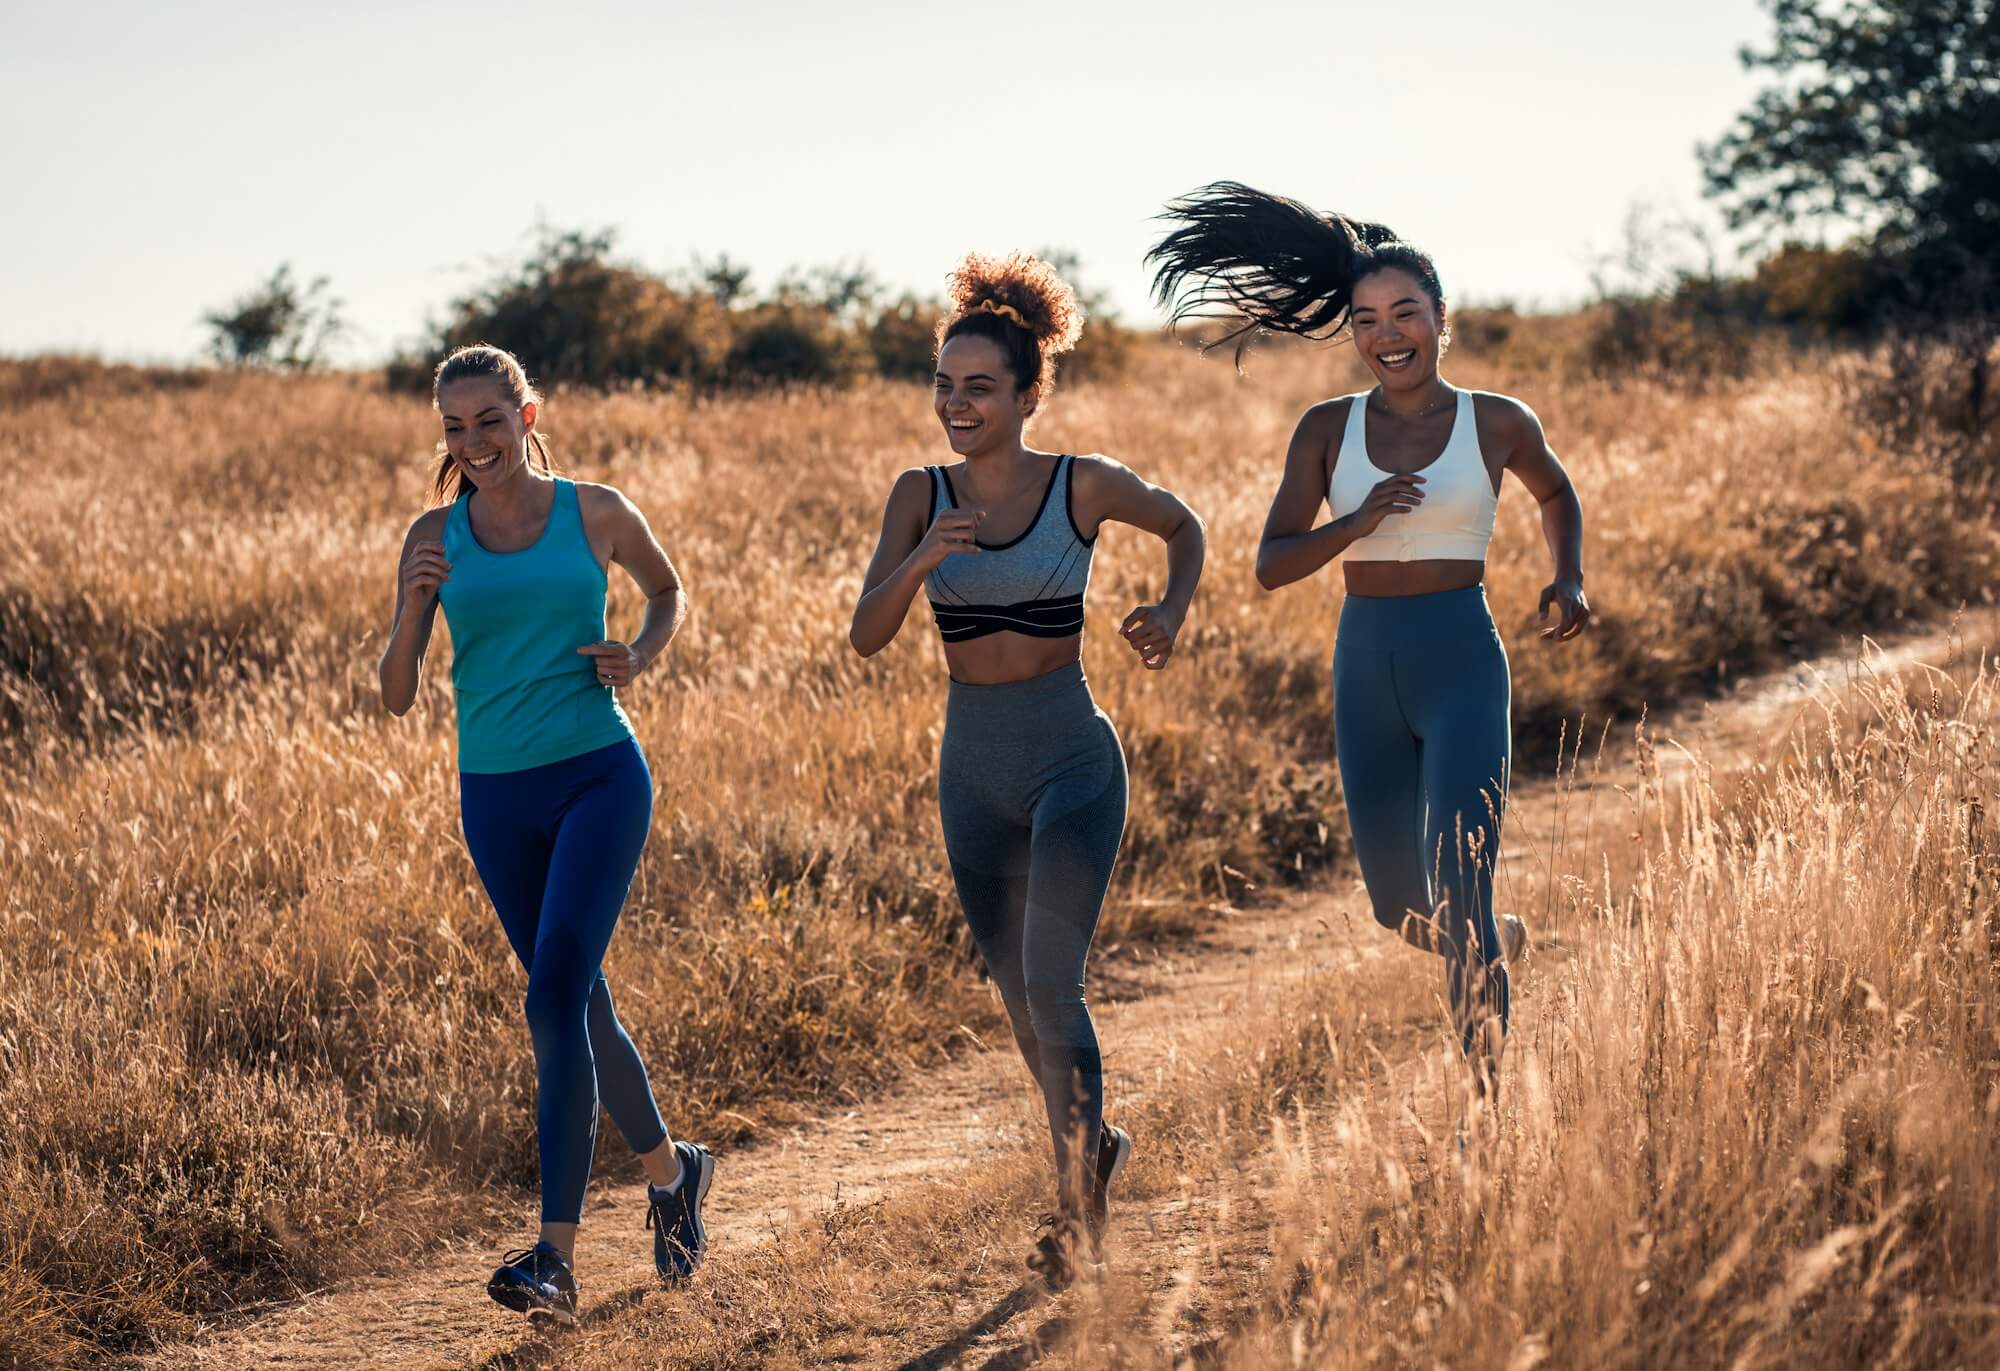 Group of sporty female friends running outdoors.